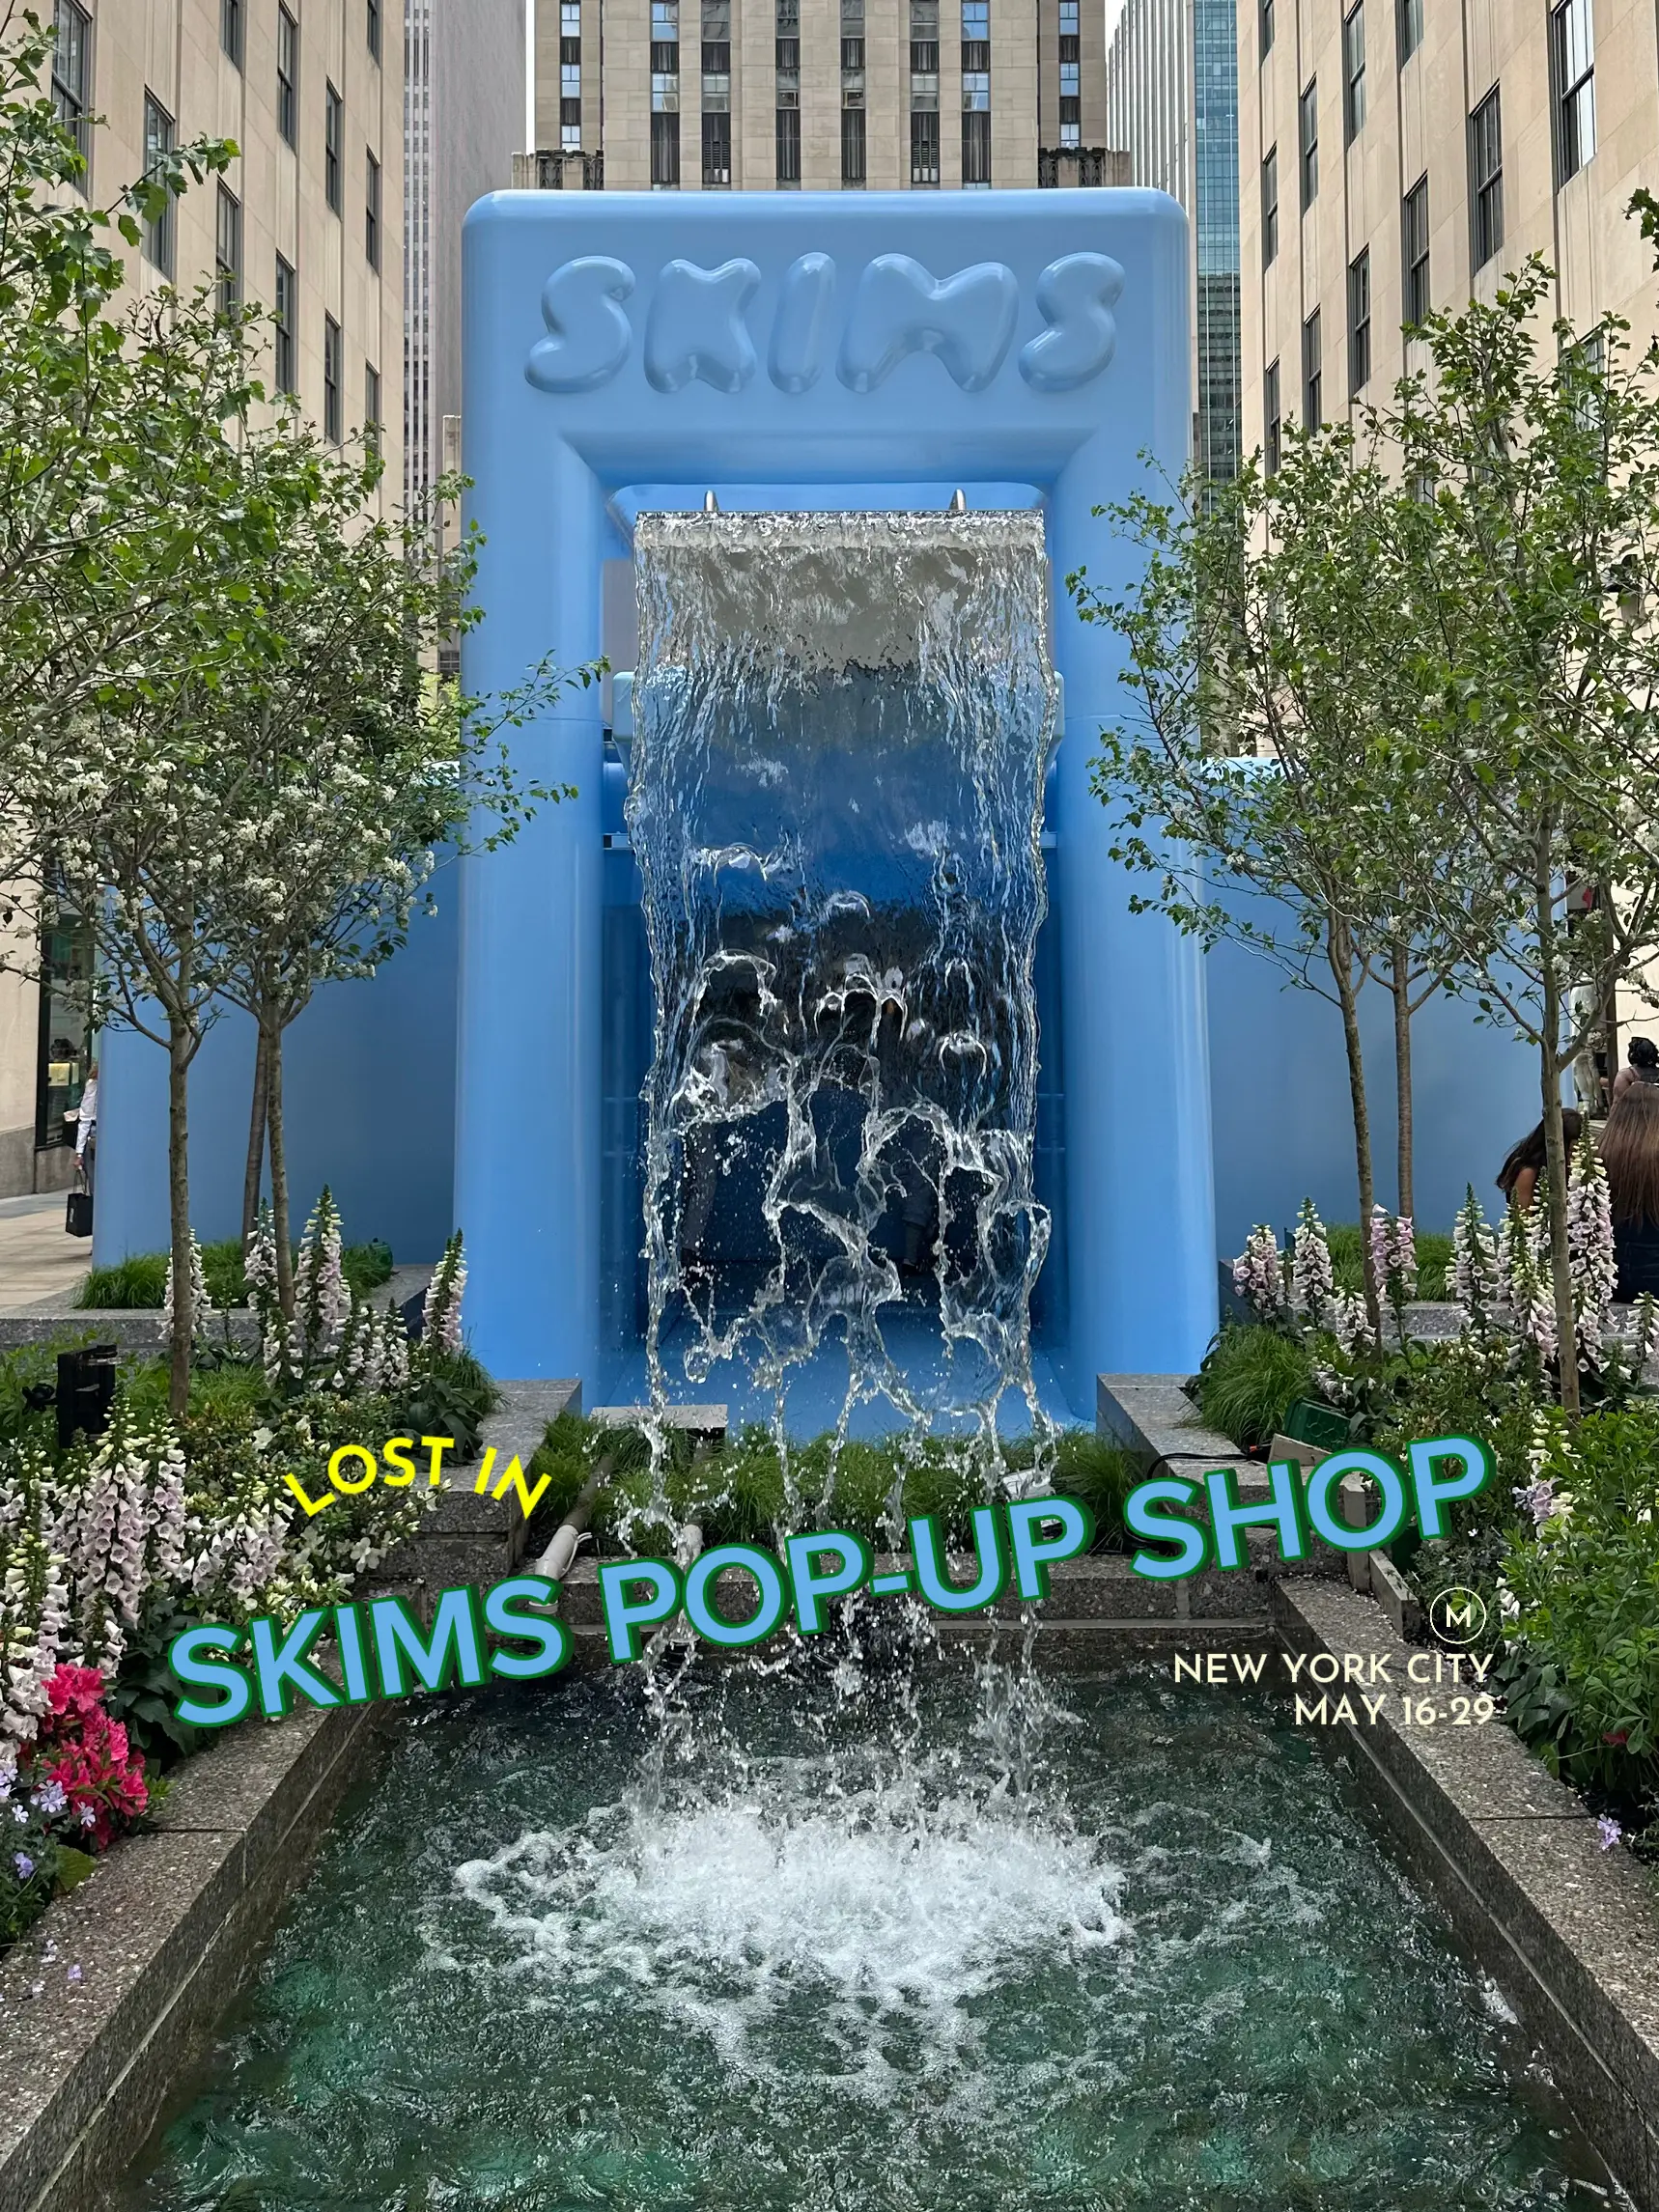 SKIMS POP-UP SHOP: Inside Look, Gallery posted by Rebeka ✨ NYC